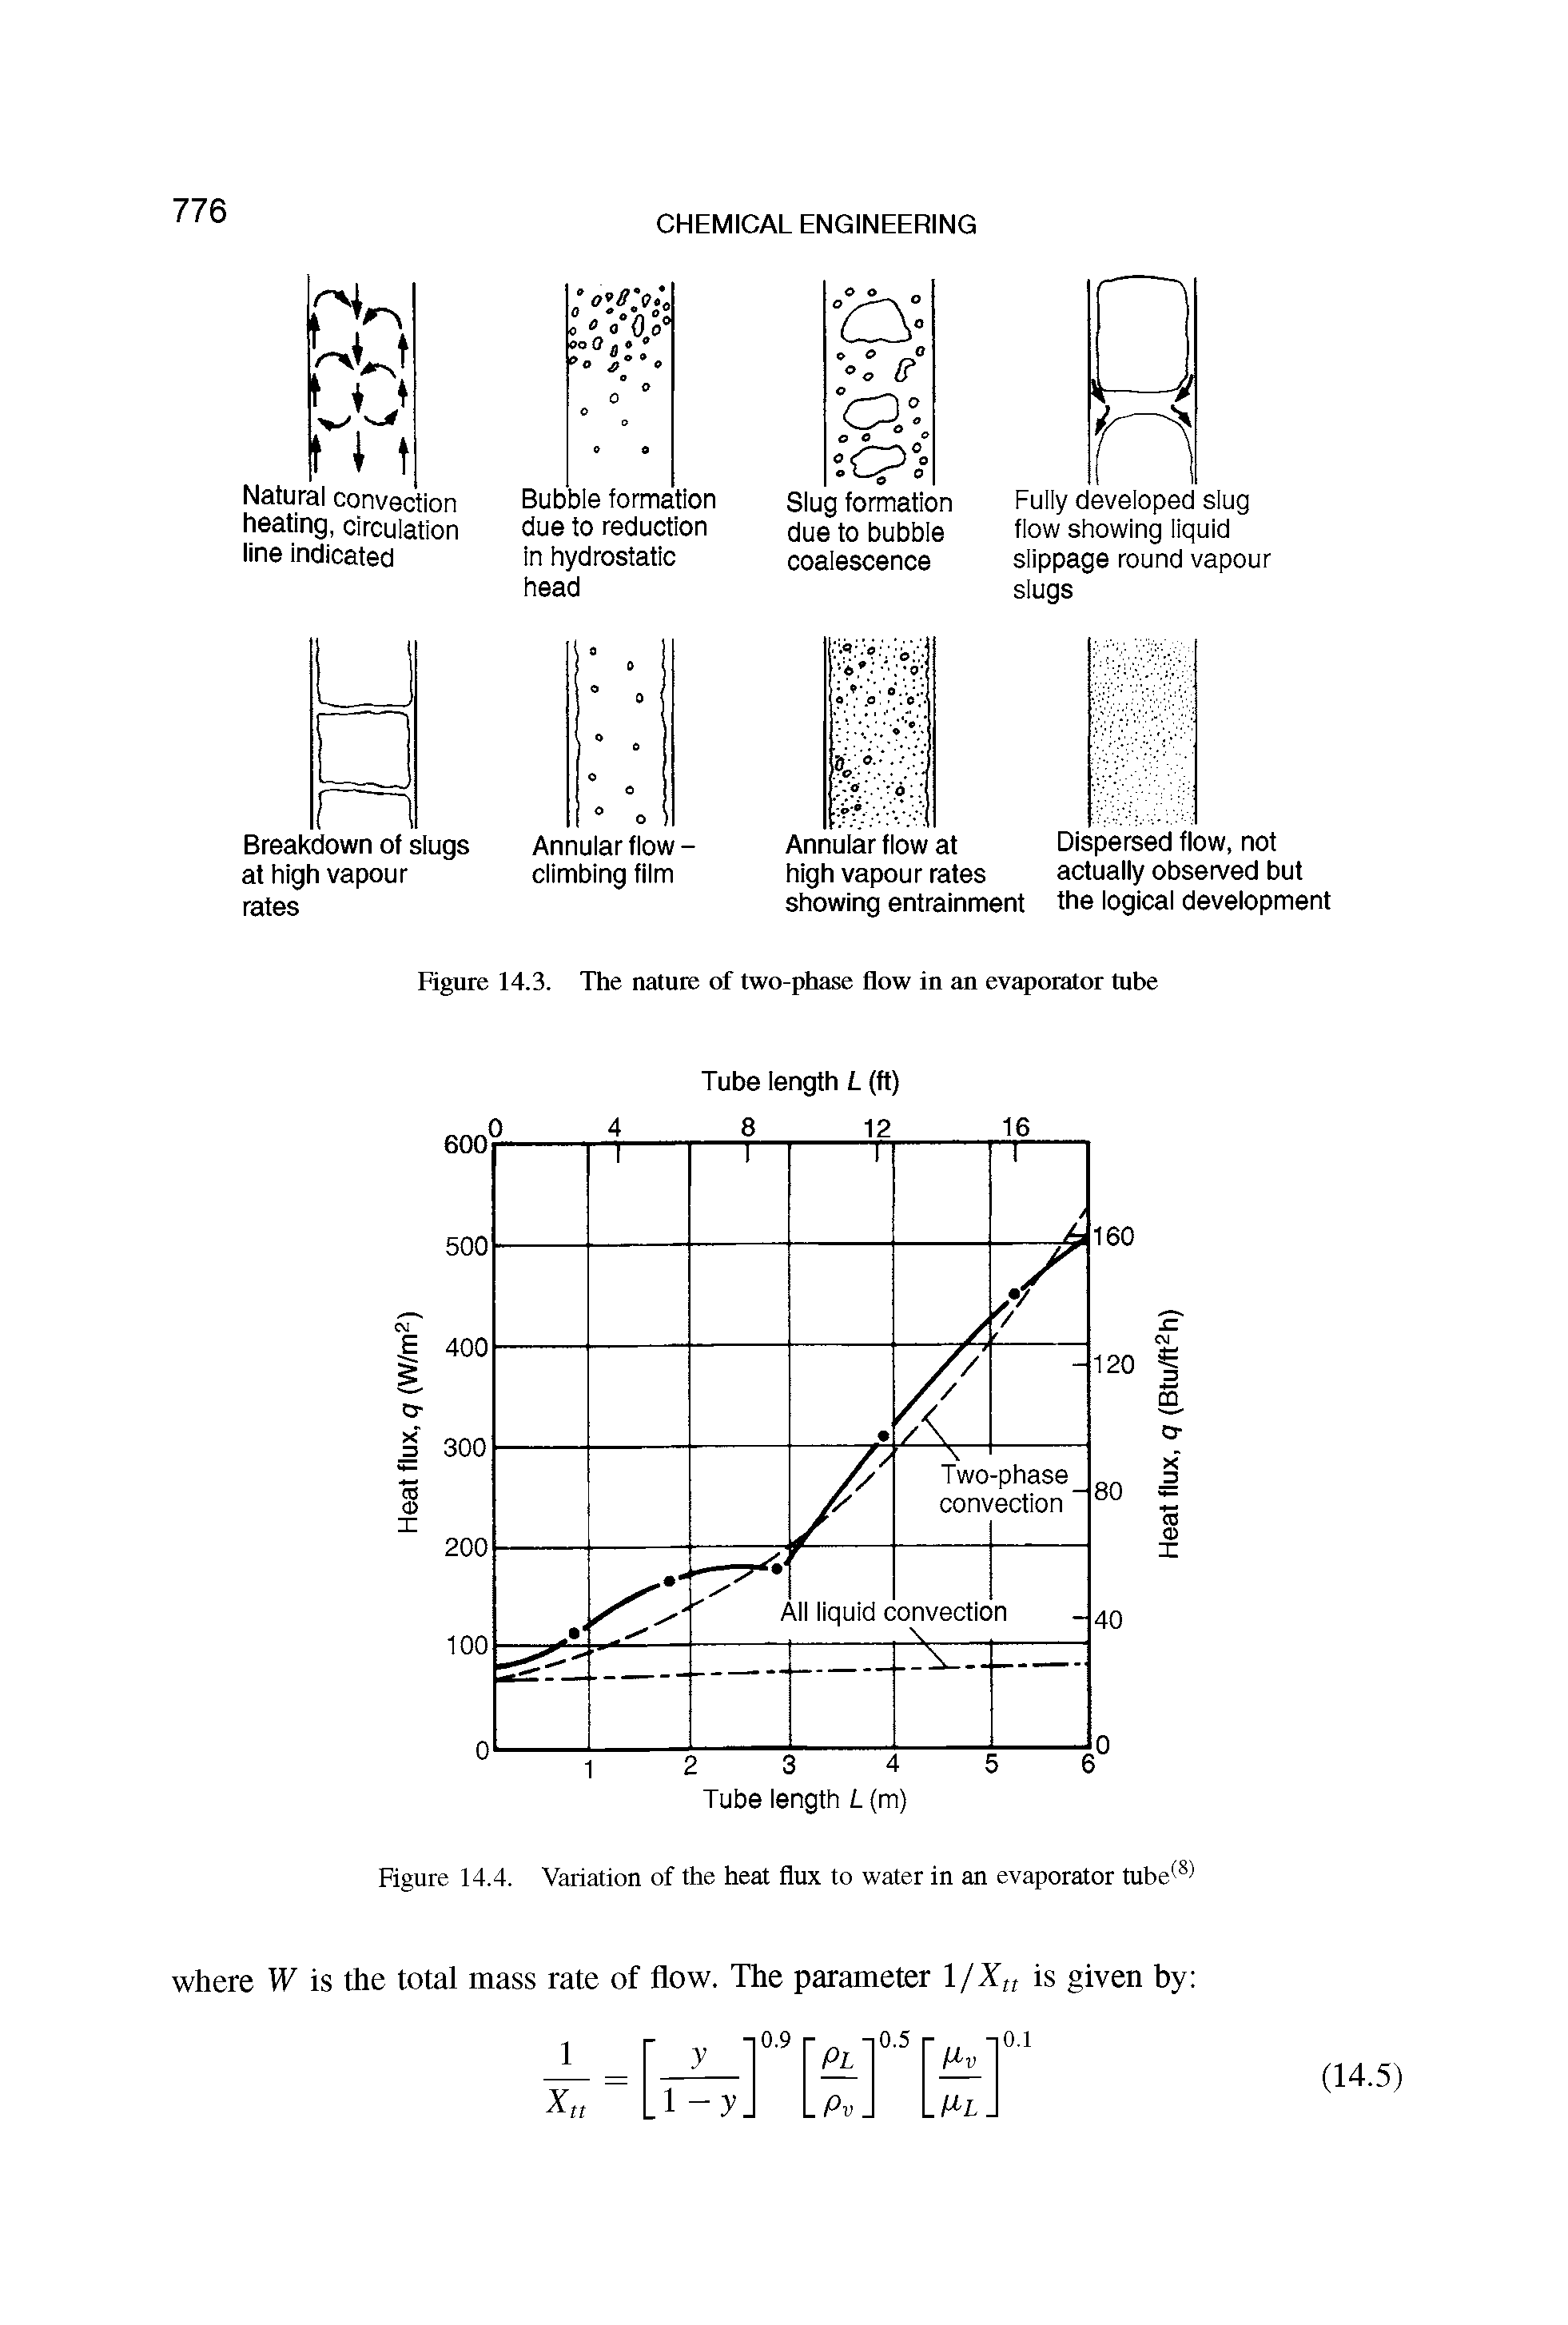 Figure 14.3. The nature of two-phase flow in an evaporator tube...